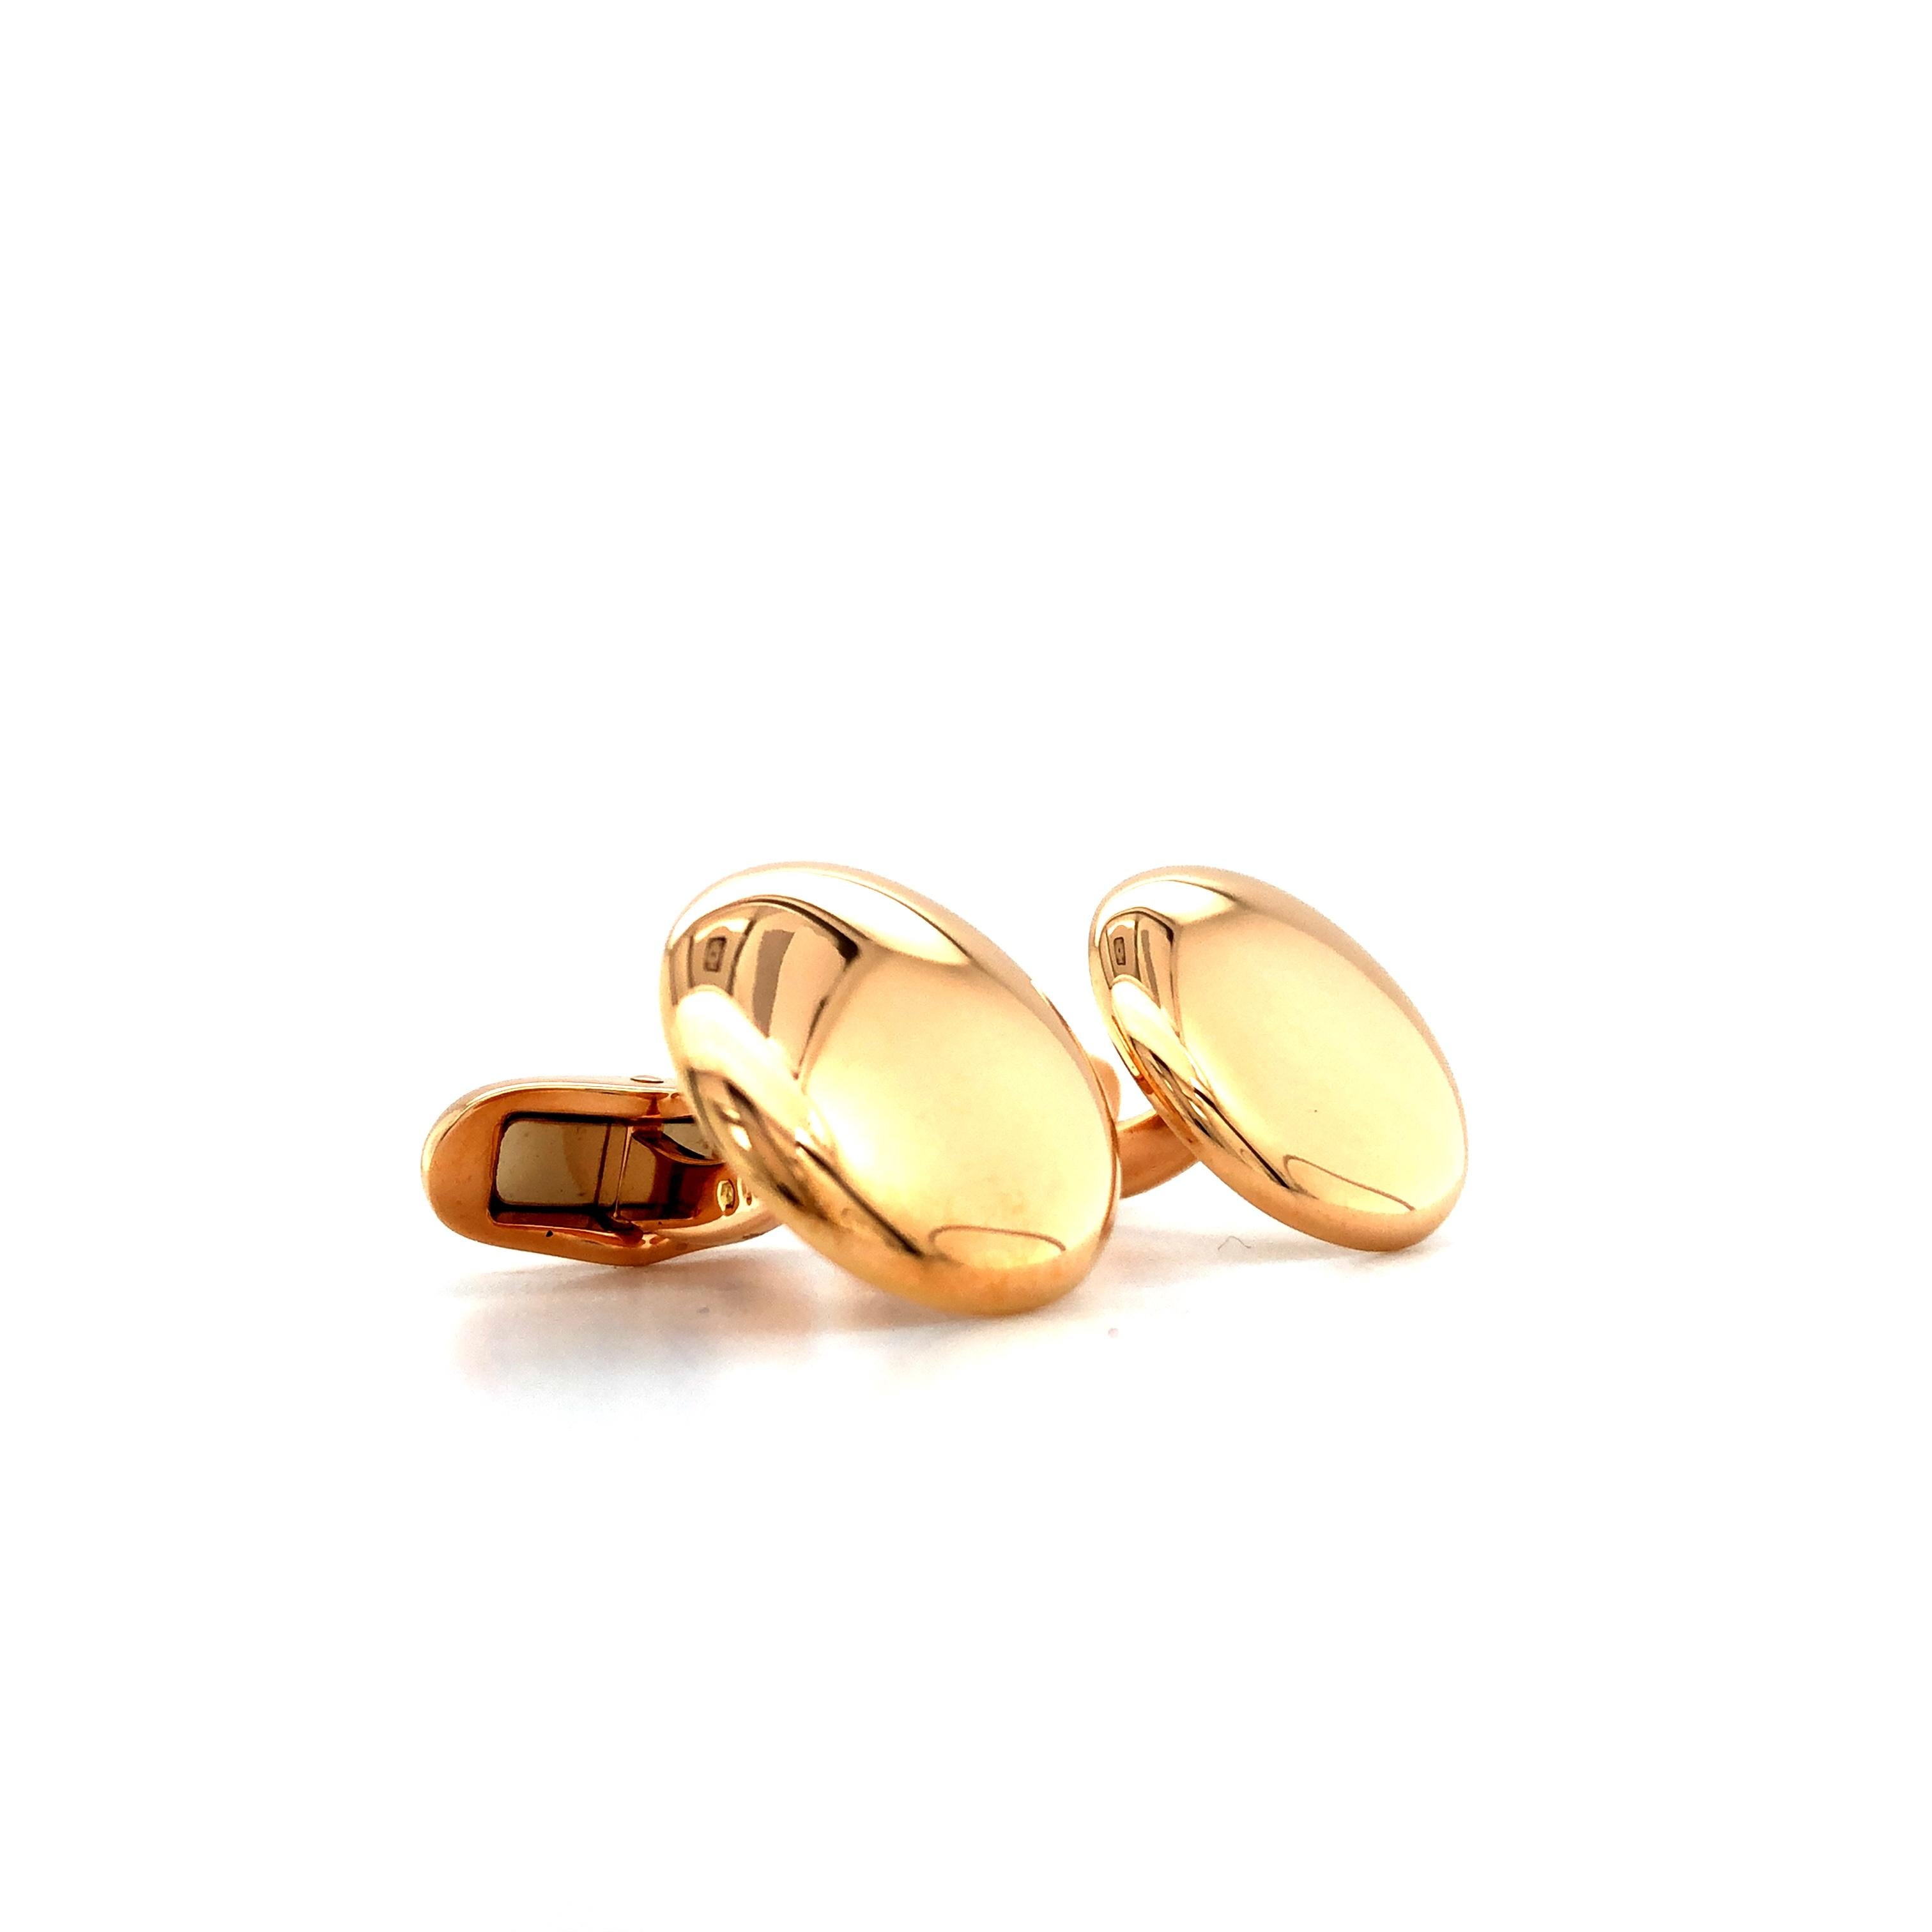 Women's or Men's Round Domed Cufflinks - 18k Rose Gold - Highly Polished - Diameter 17.6 mm For Sale